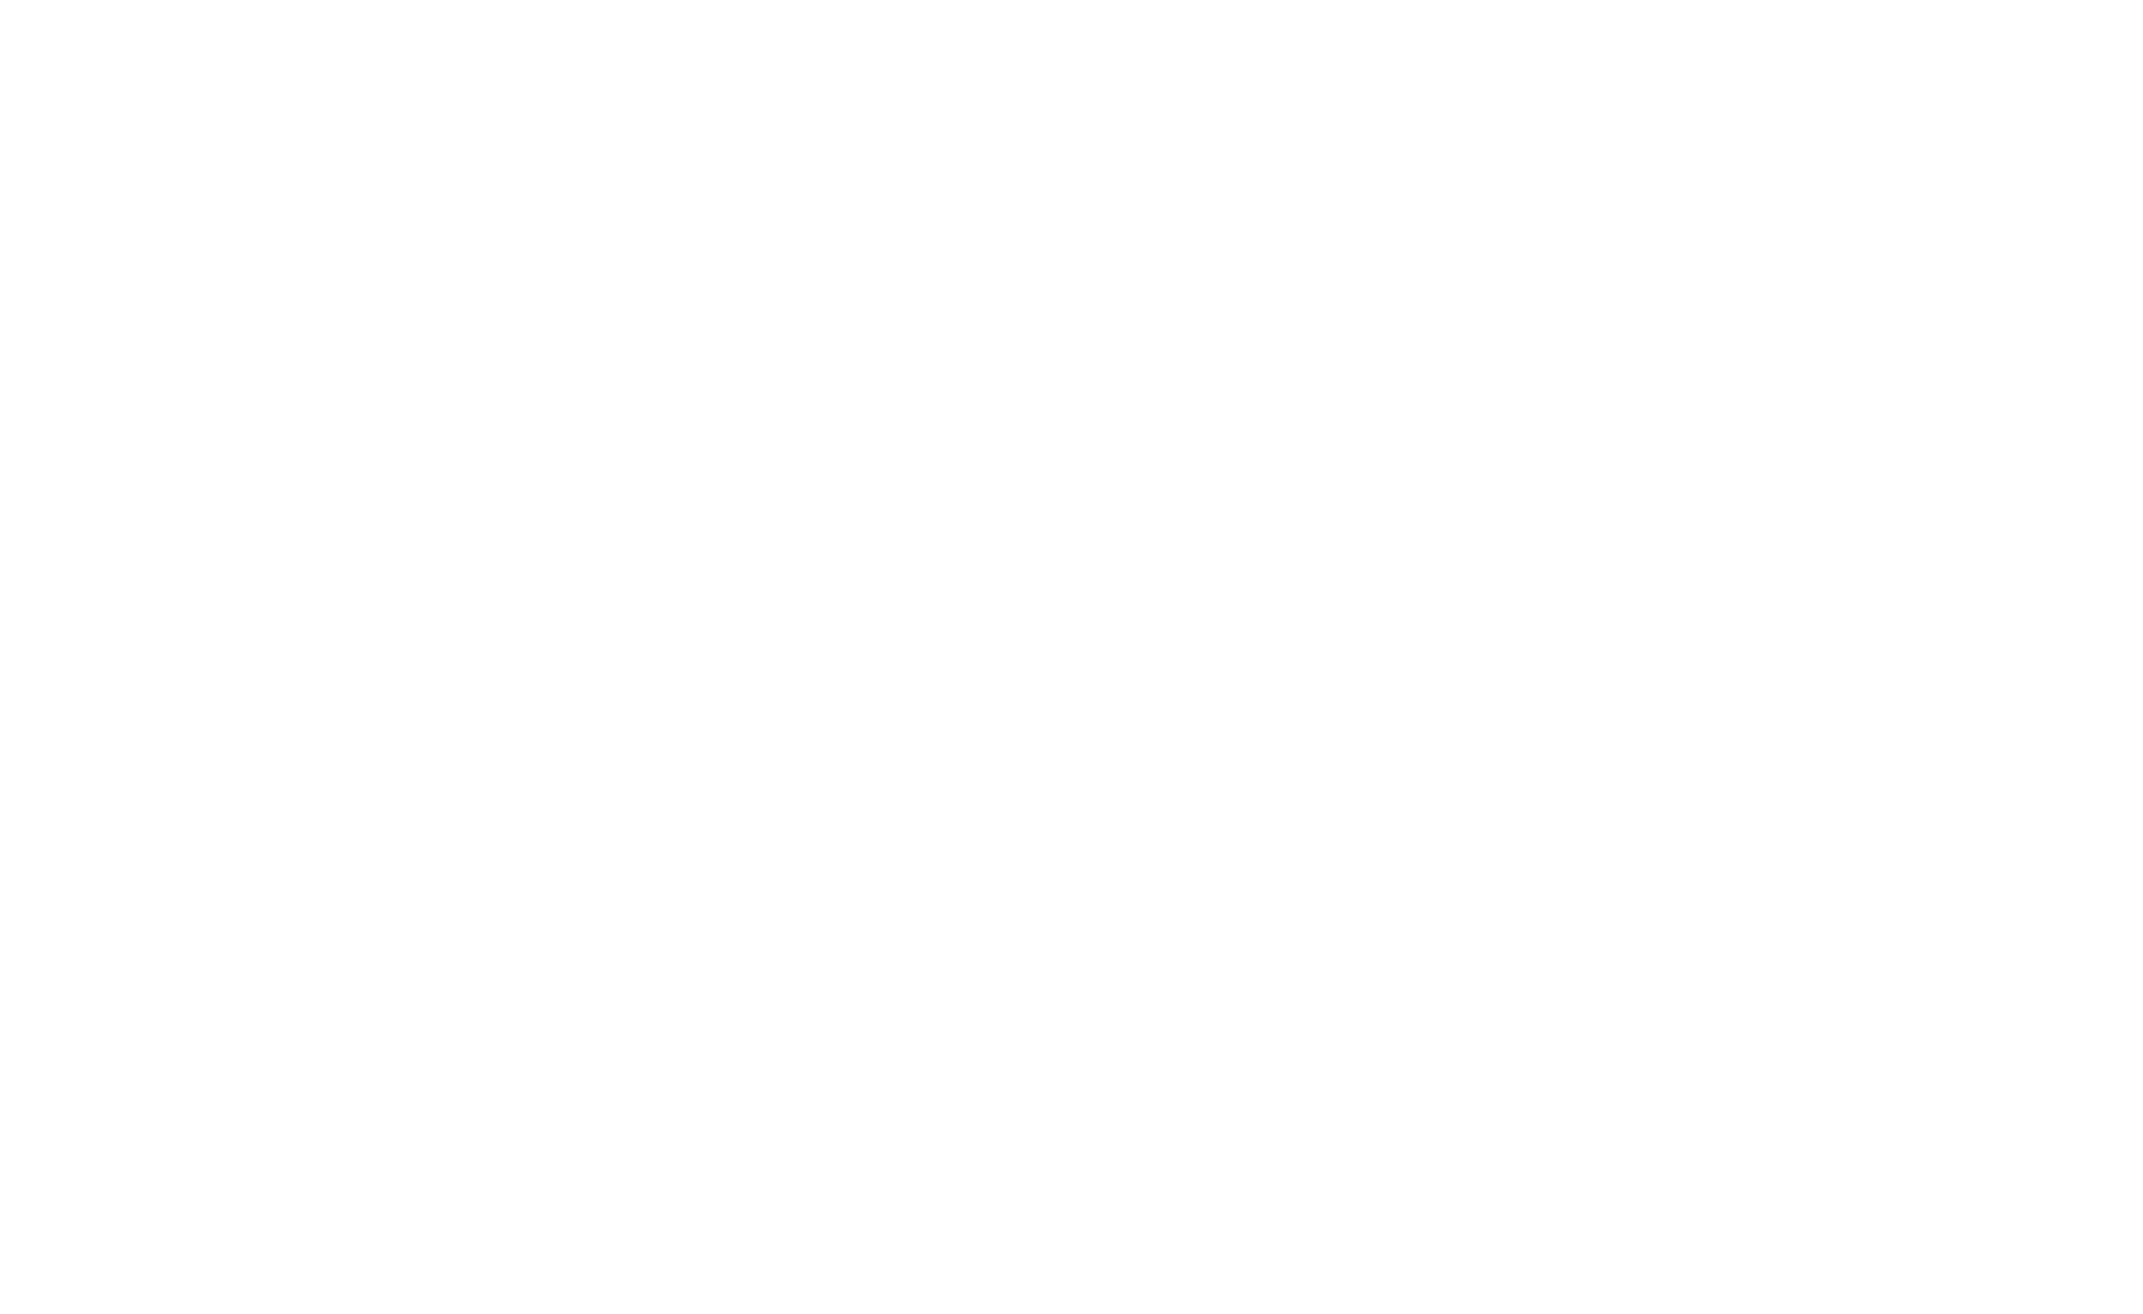 Better Service Co.